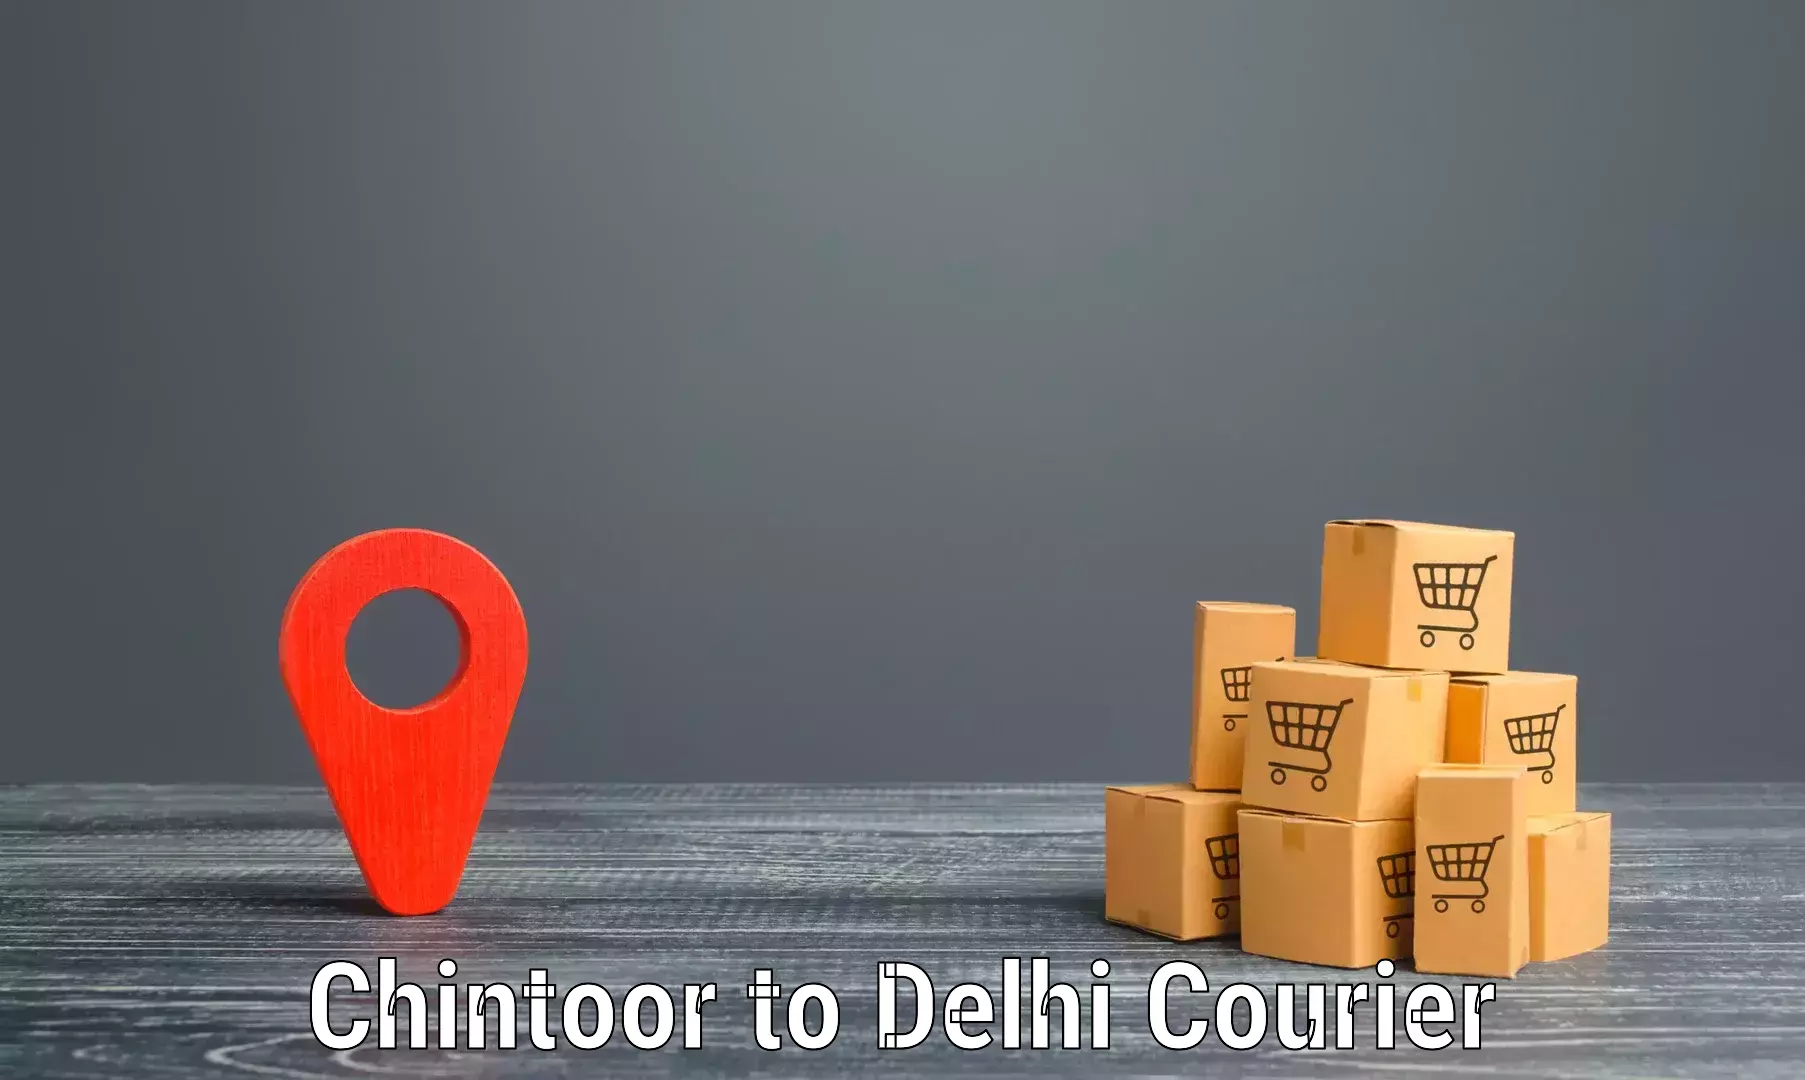 End-to-end delivery Chintoor to Jawaharlal Nehru University New Delhi